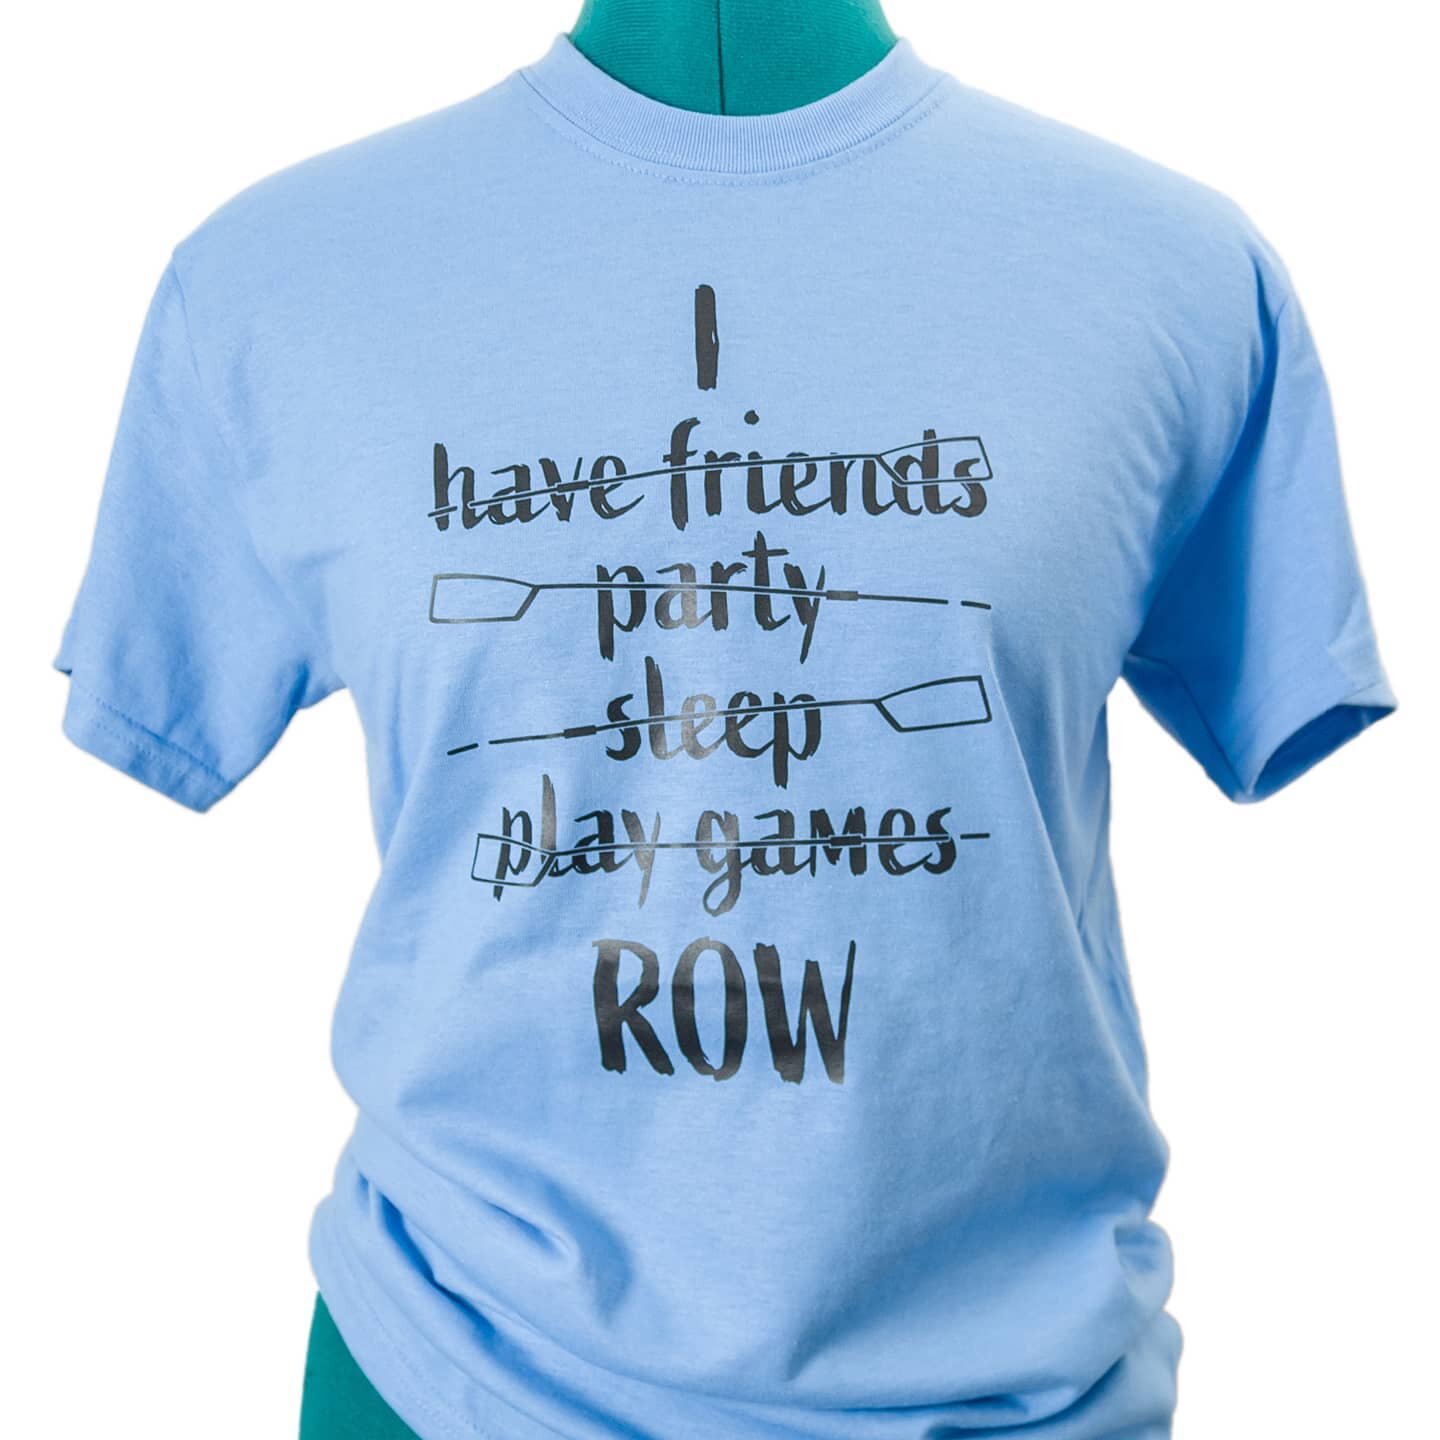 Show off your hobby to all your friends! &hellip;oh wait, forgot. You row. Well, no matter, your boatmates will know just how much you love rowing with them.  #t-shirt #swag #hobby #rowing #lifestyle